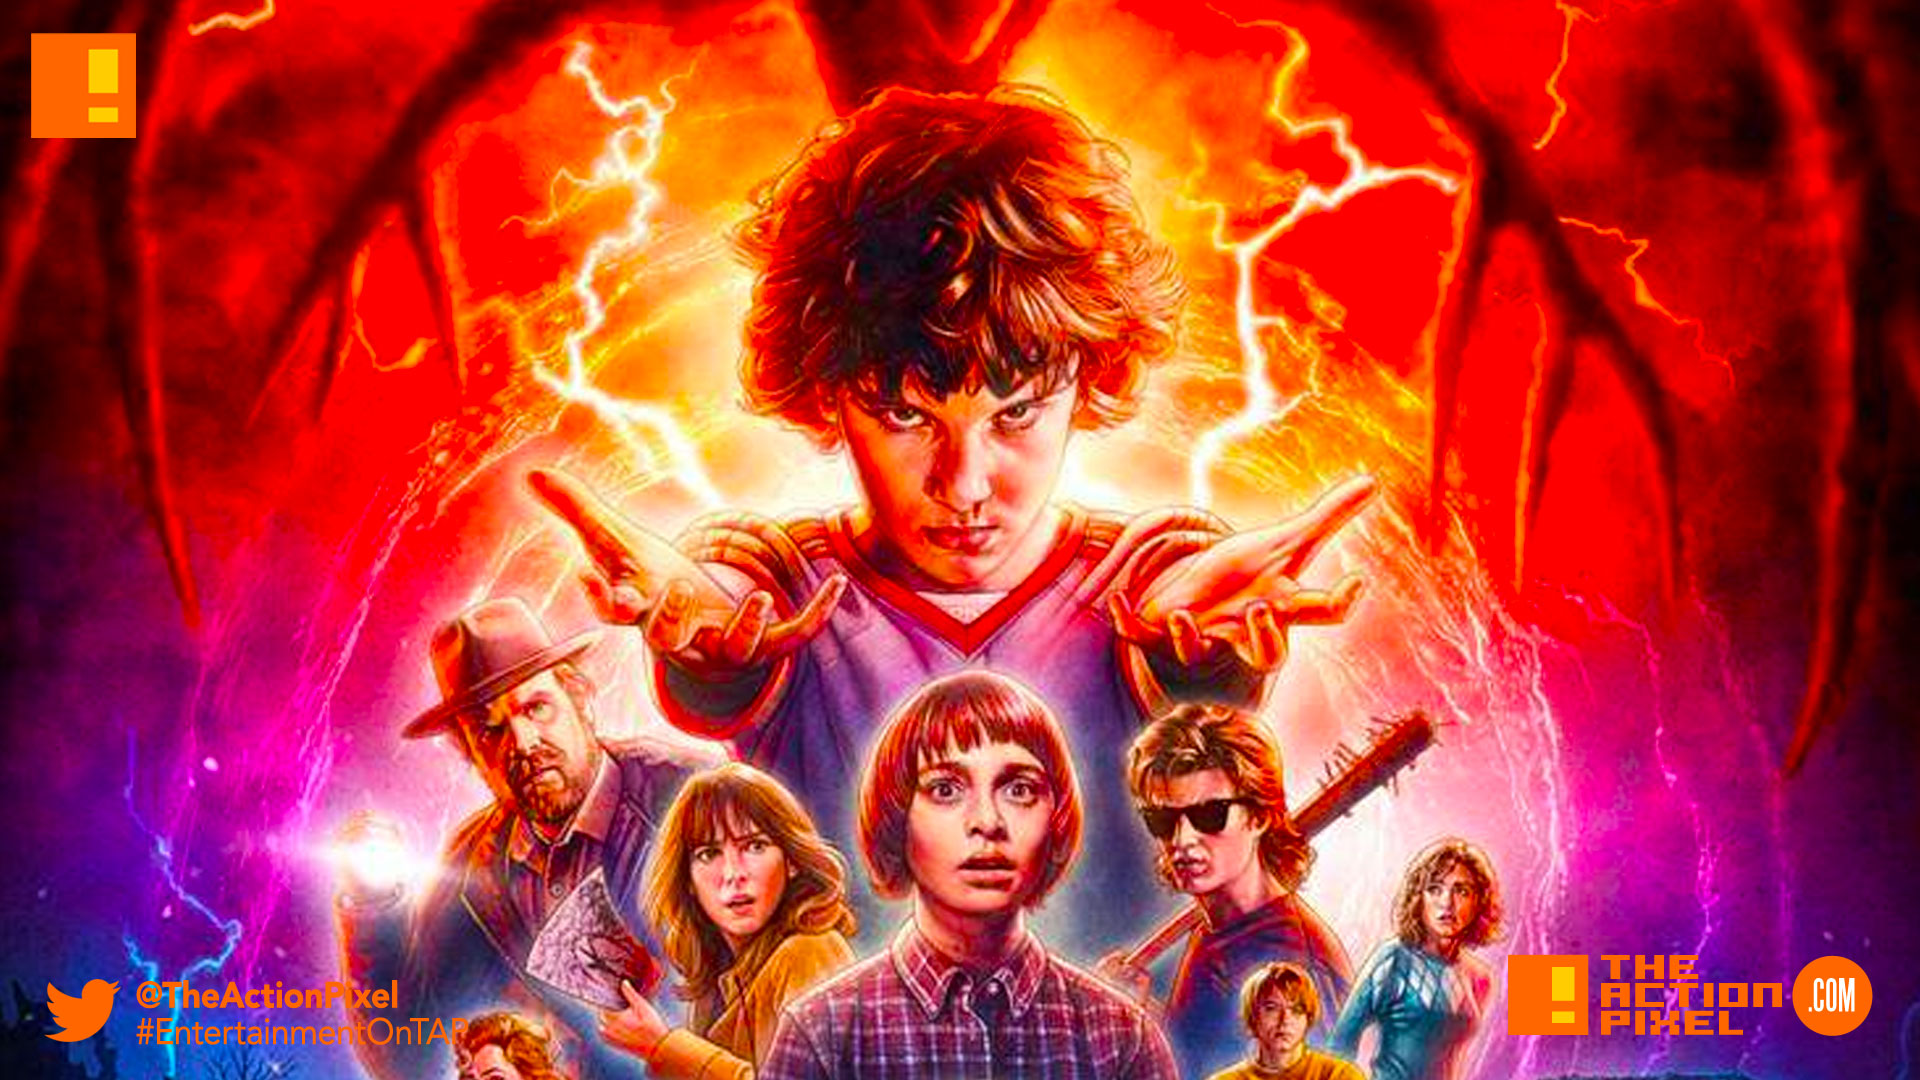 eleven, stranger things 2, netflix, the action pixel, entertainment on tap,poster, entertainment on tap